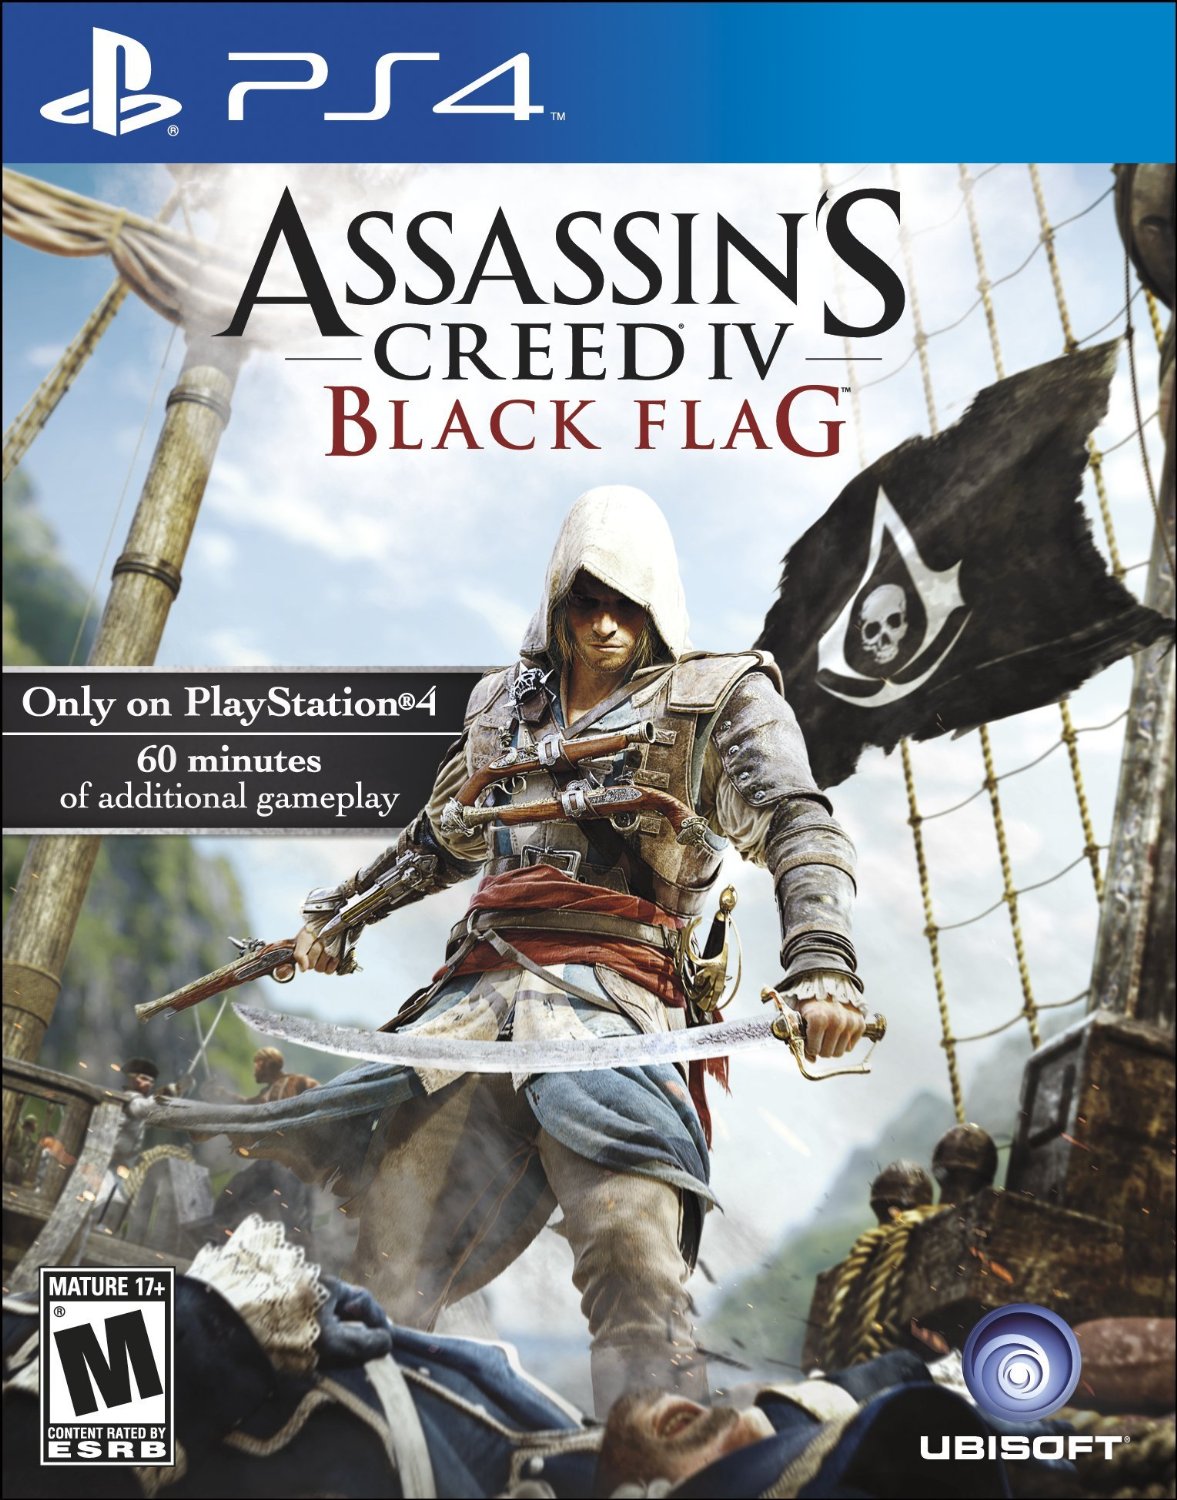 Assassin's Creed Black Flag teen gift guide video games